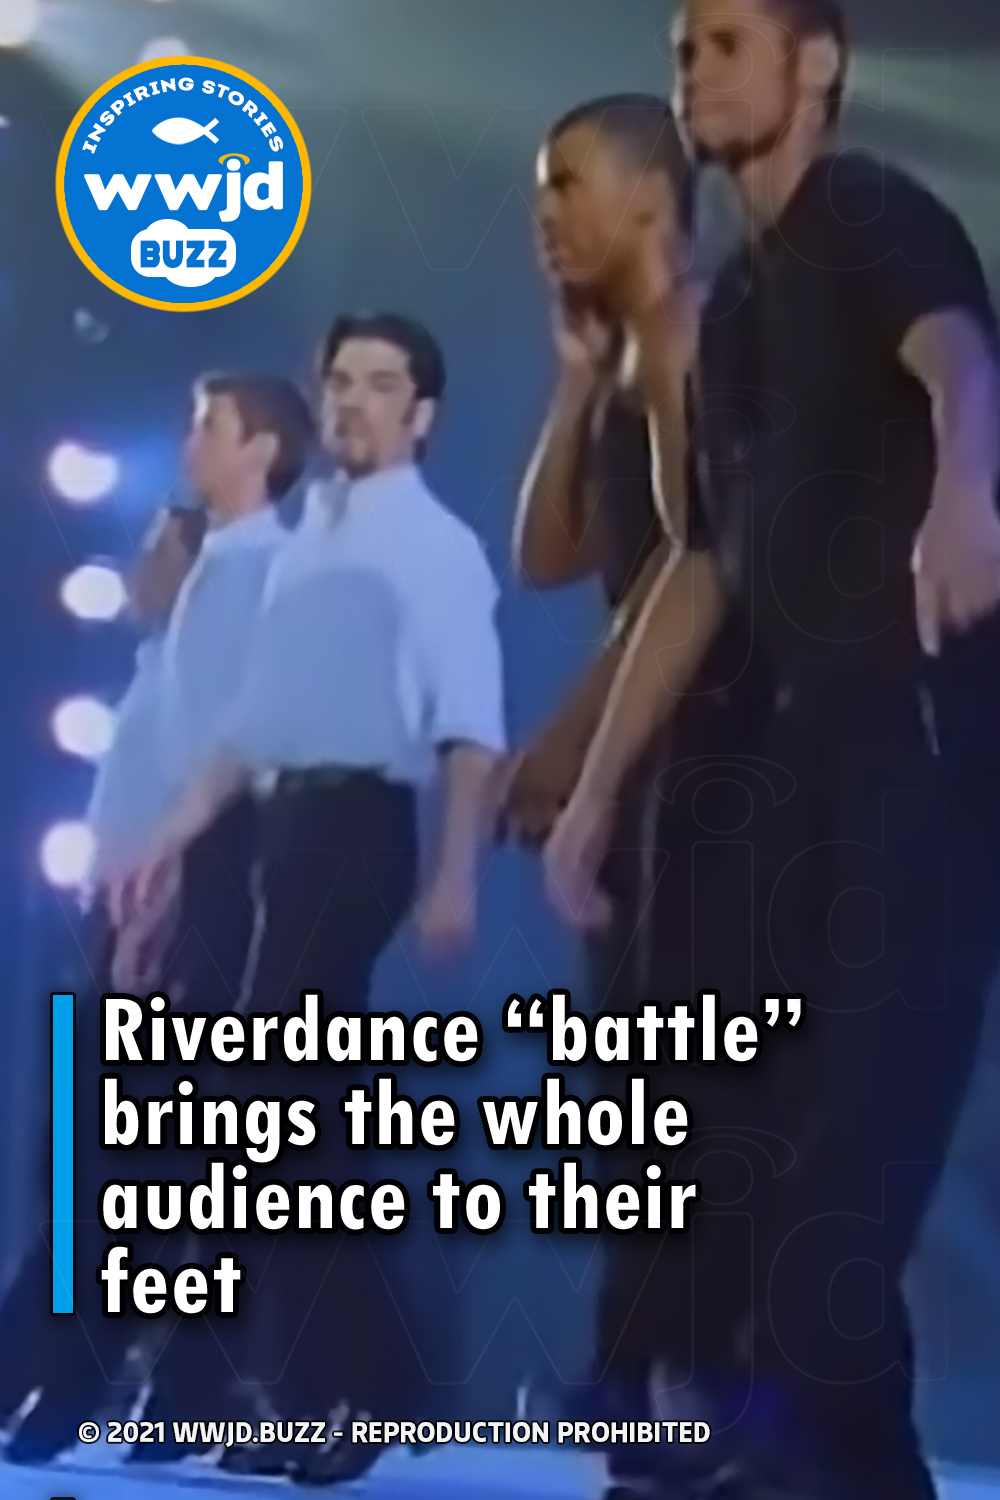 Riverdance “battle” brings the whole audience to their feet